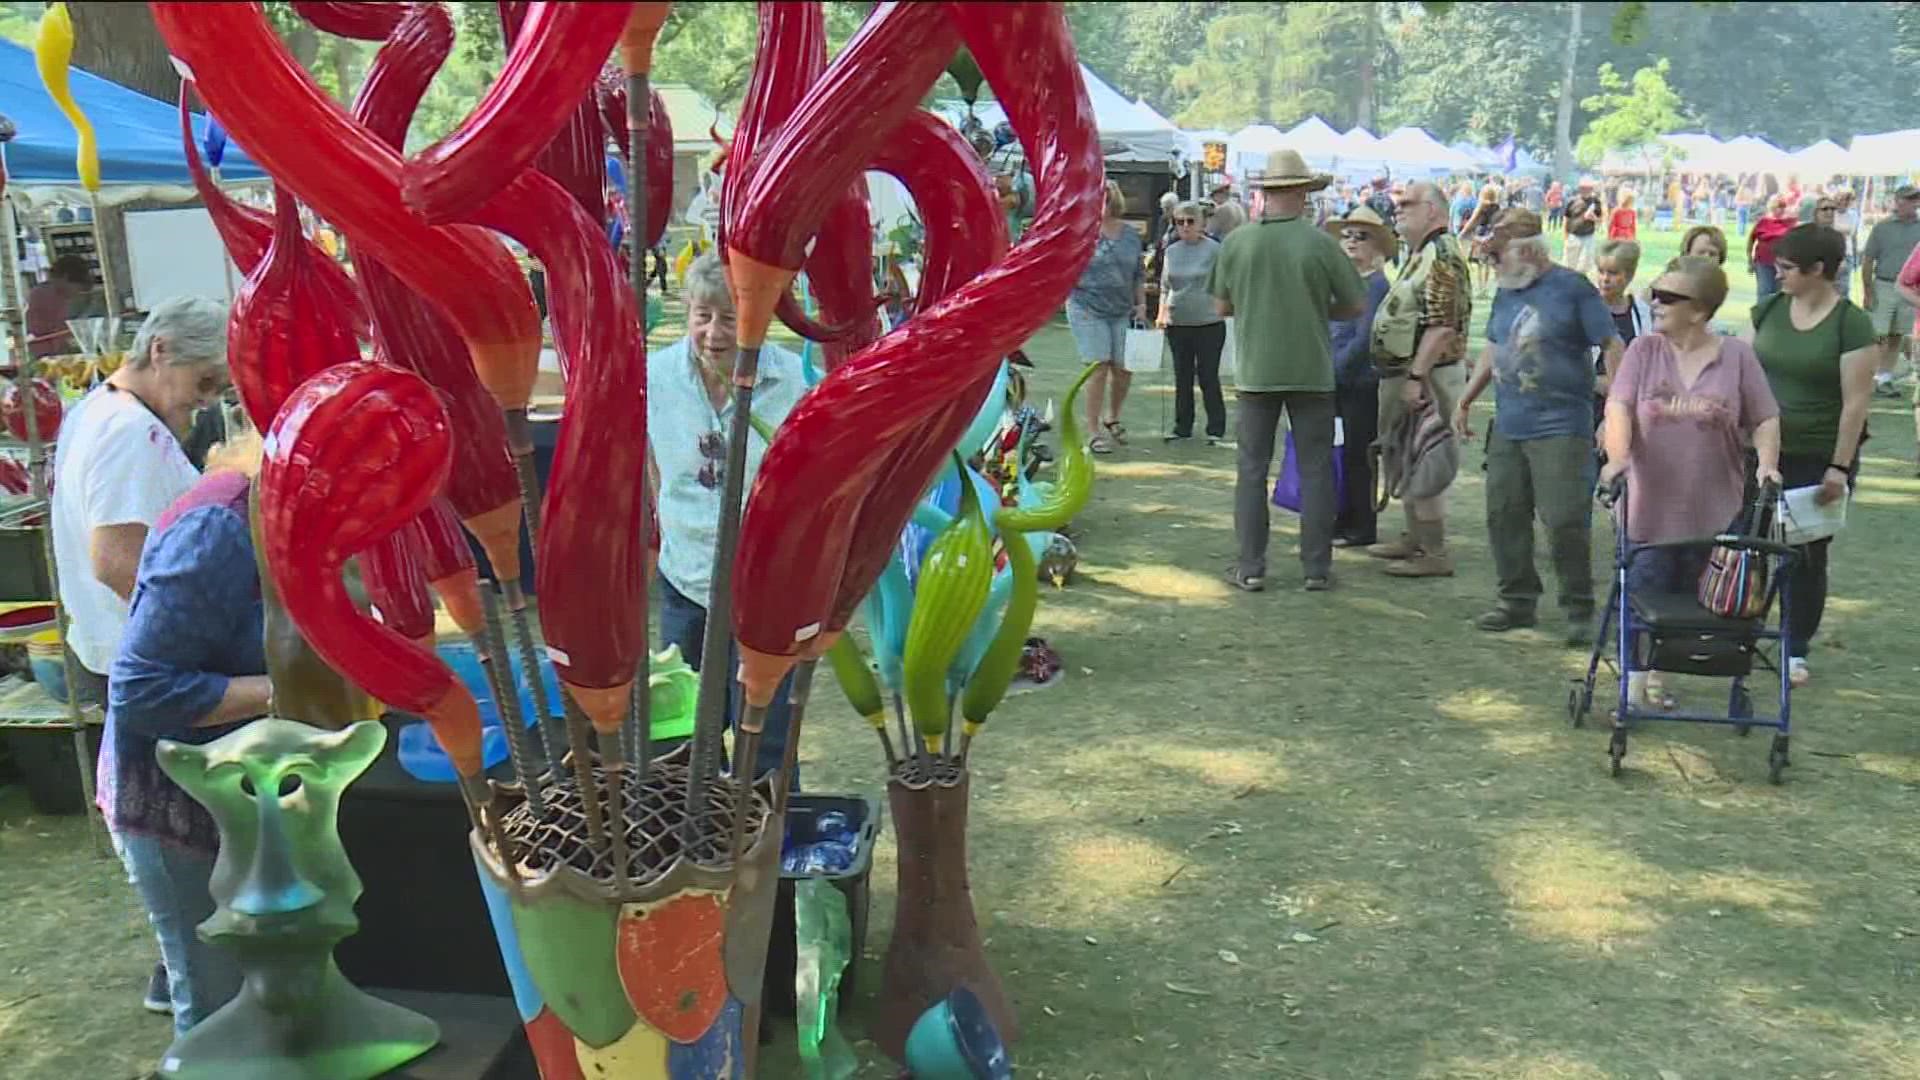 The event, organized by the Boise Art Museum, features more than 250 artists' works made from glass, metalwork, pottery and textiles, jewelry and toys.